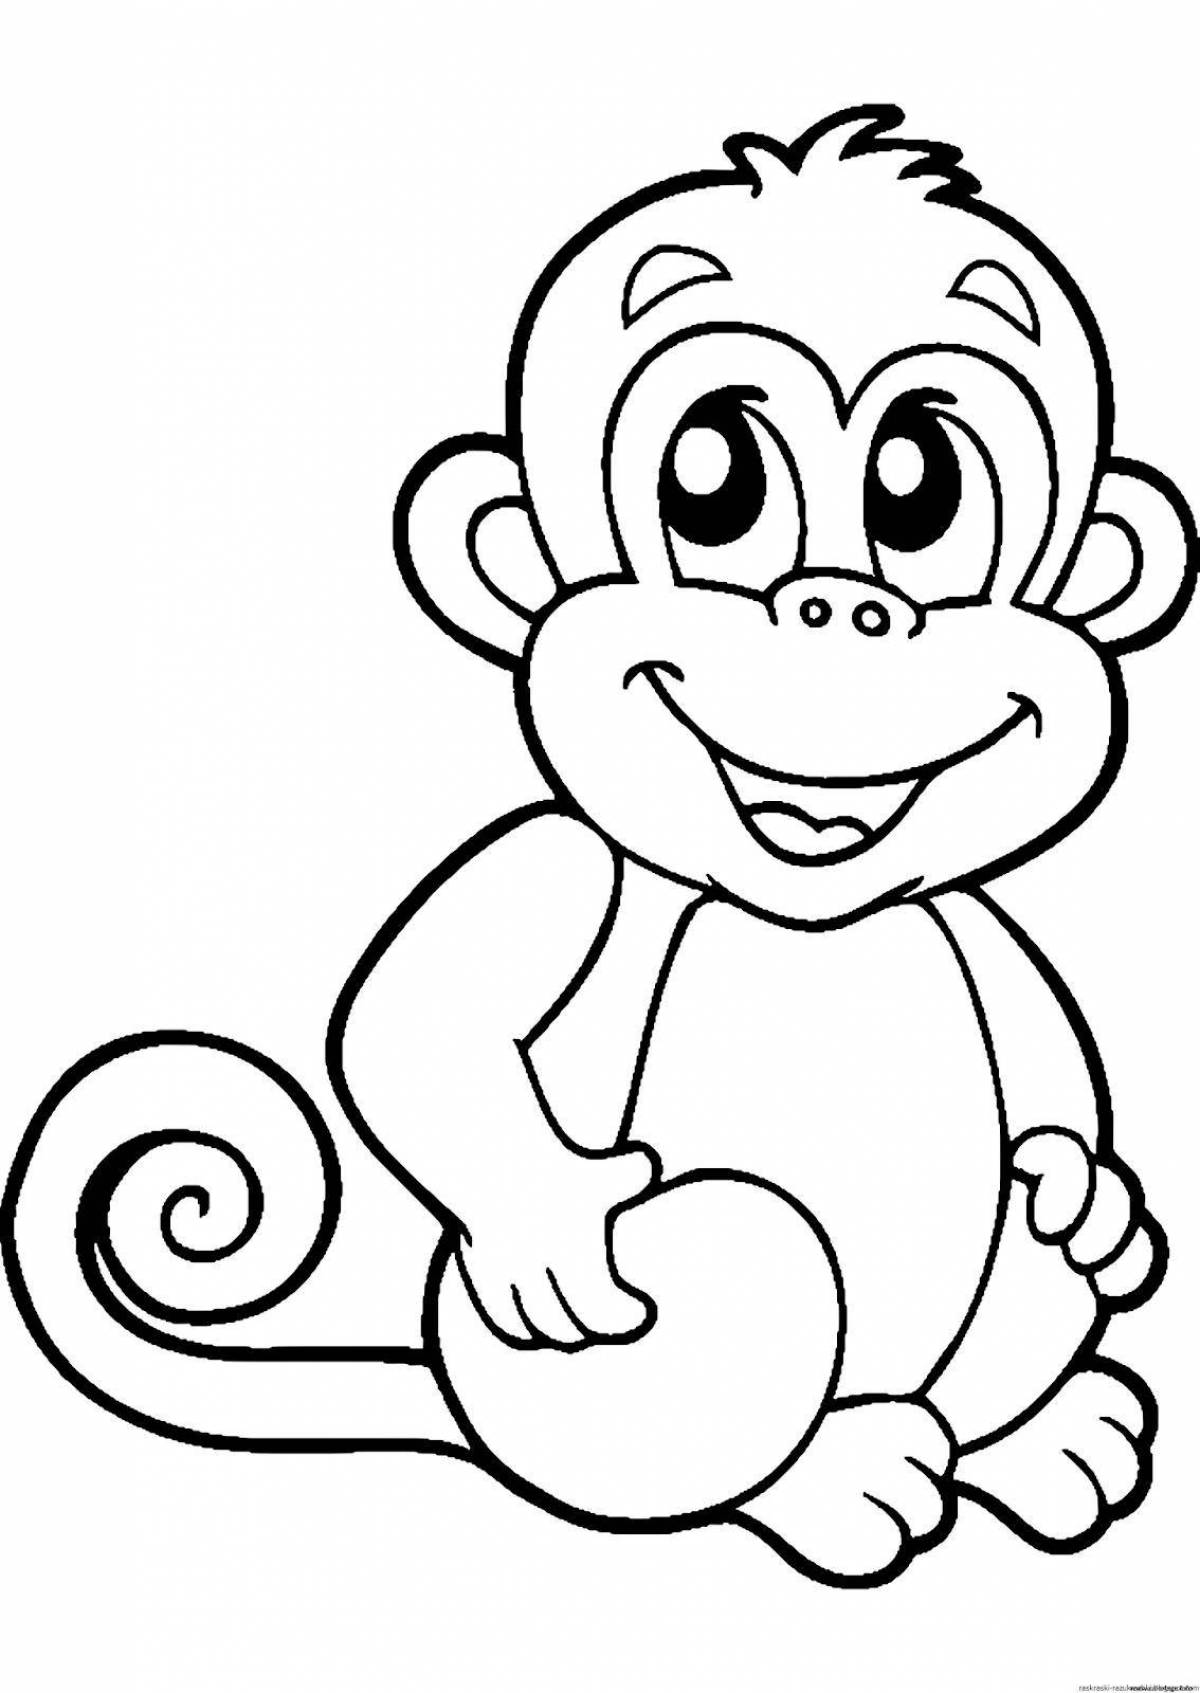 Witty monkey drawing for kids